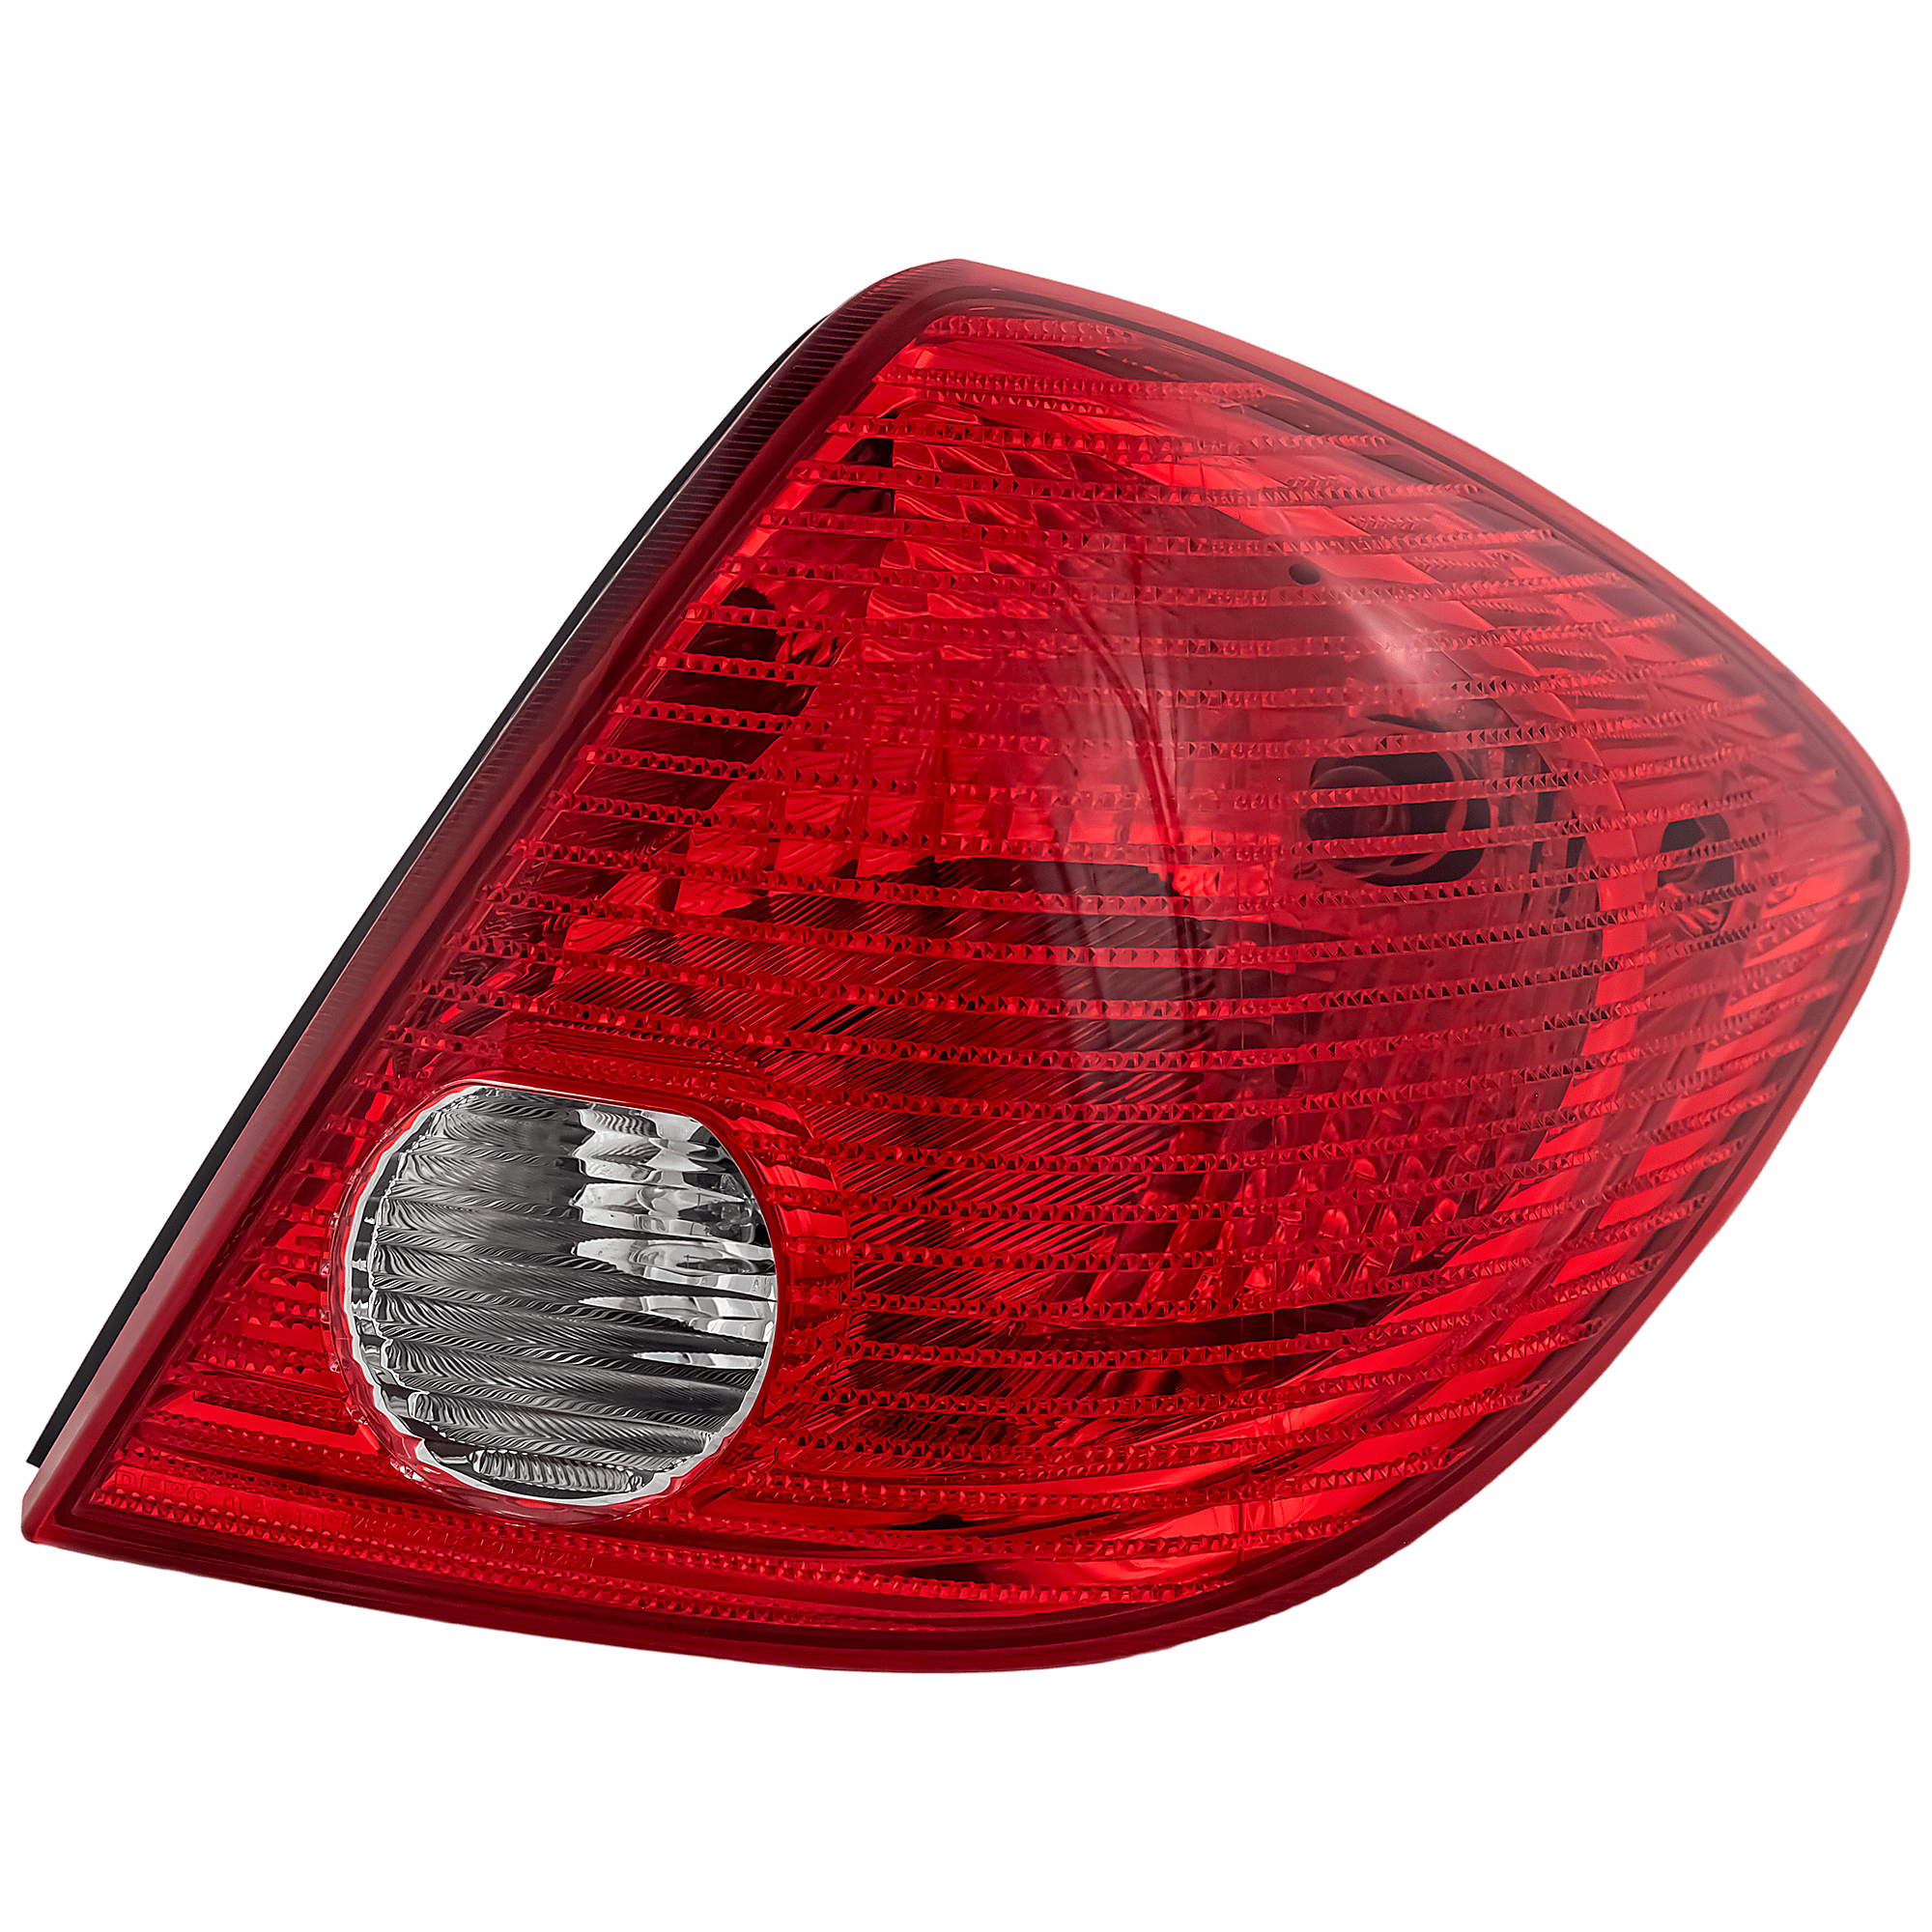 Go-Parts 4 Door; Sedan for 2005-2010 Pontiac G6 Rear Tail Light Lamp Assembly / Lens / Cover Side - Driver Left 15242809 GM2800201 Replacement 2006 2007 2008 2009 